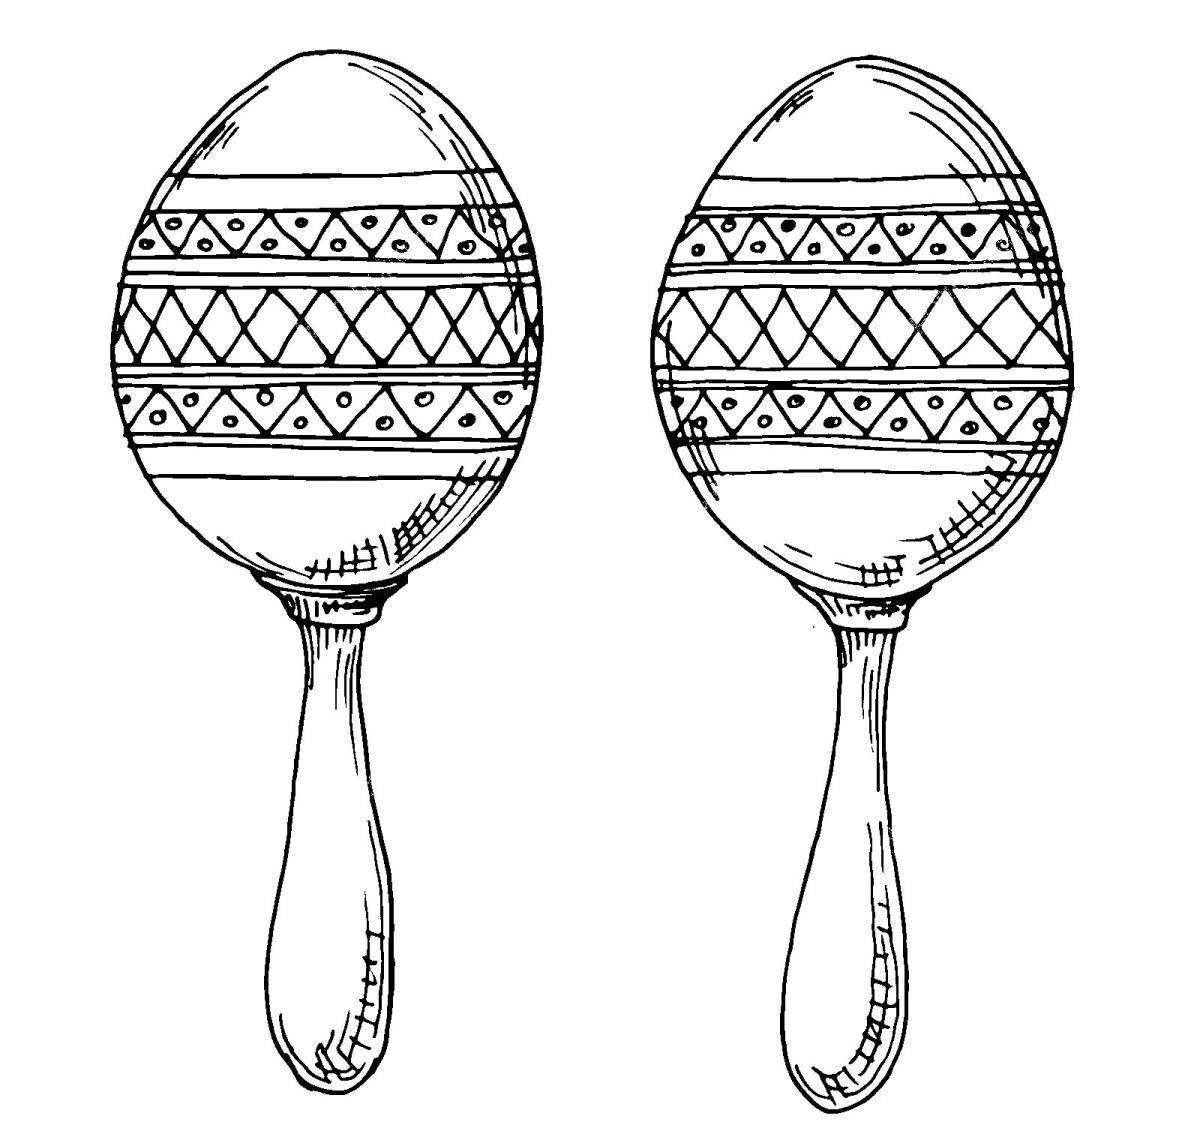 Charming spoons for Russian folk instruments